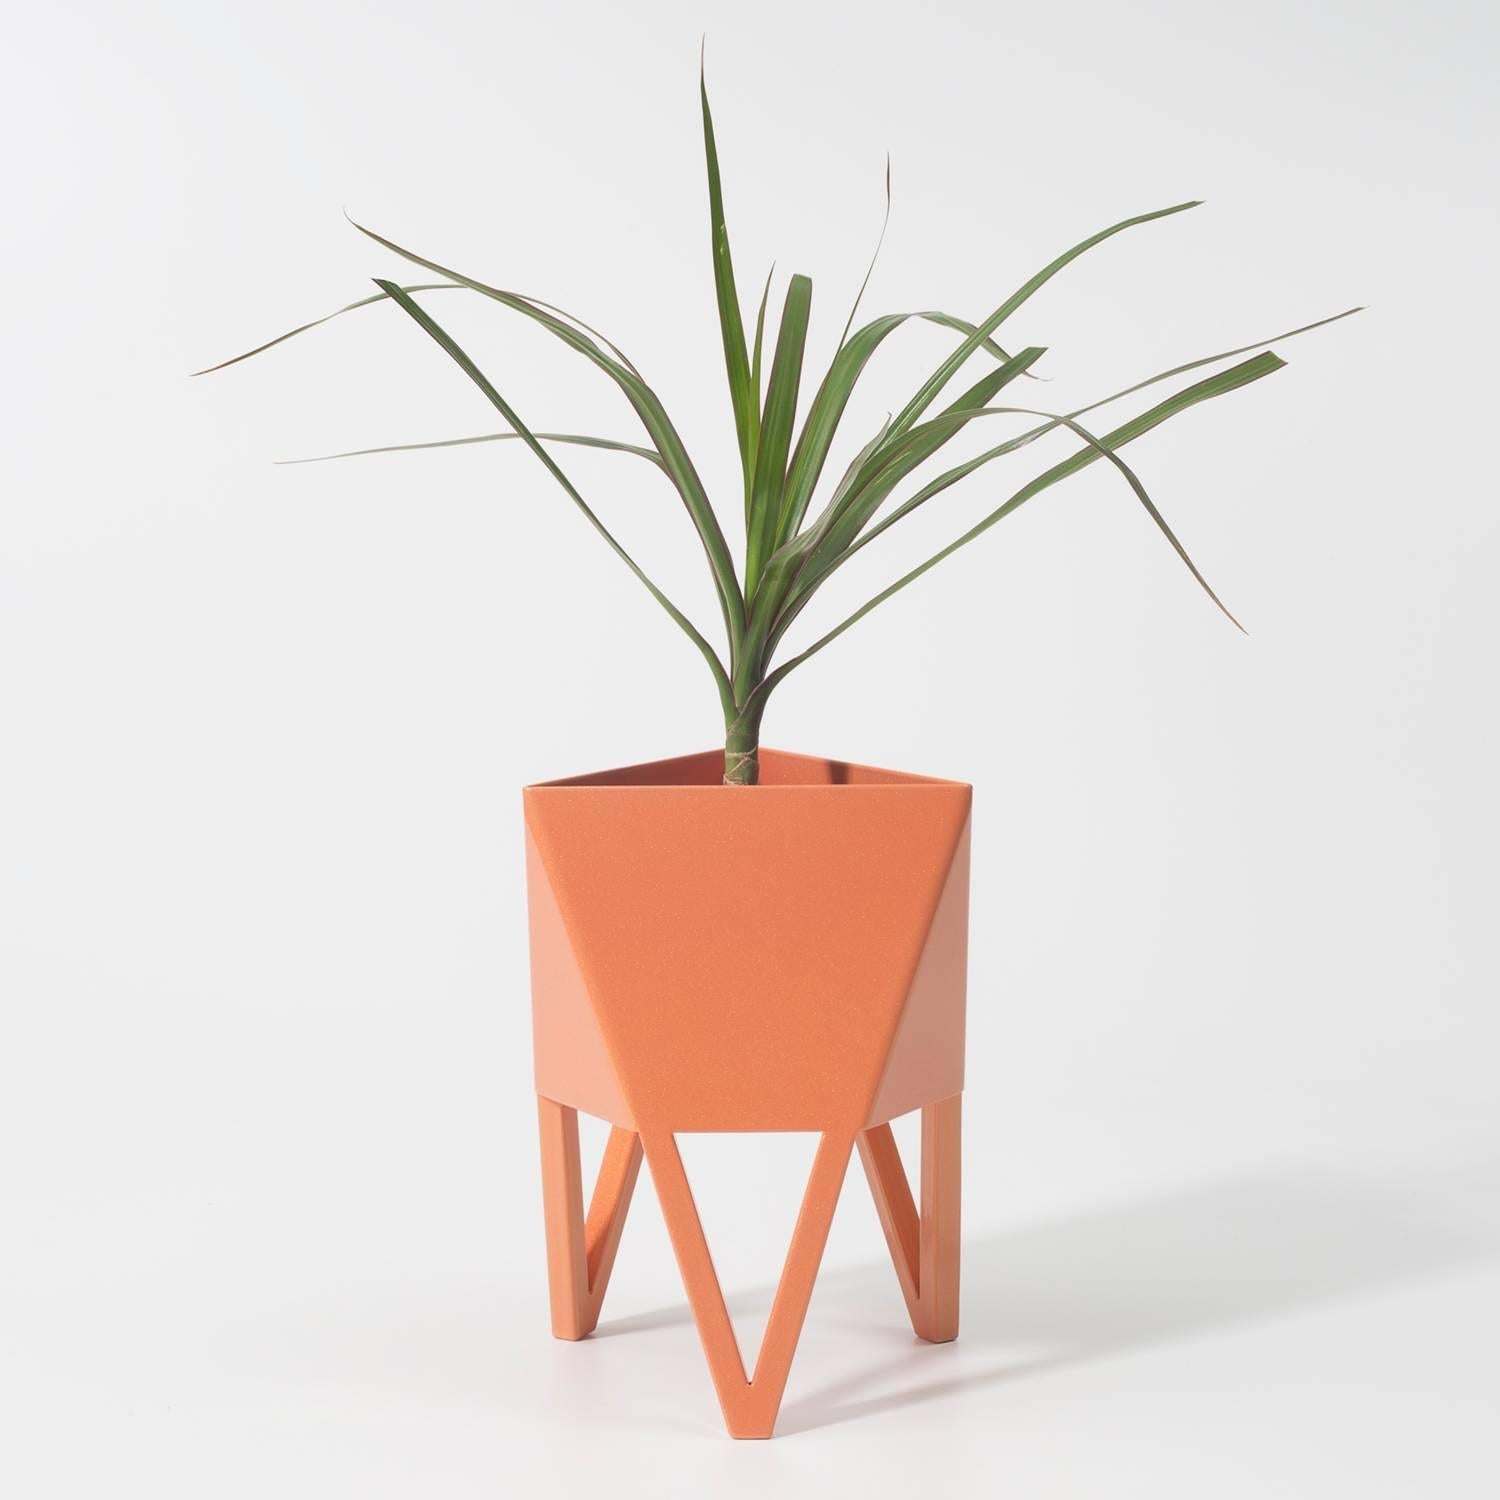 Introducing Force/Collide's award-winning signature planter, now in production with nine colors and four sizes. Using a seamless brake-forming technique, one sheet of steel is wrapped into a unique geometric pattern that's triangular at the top and